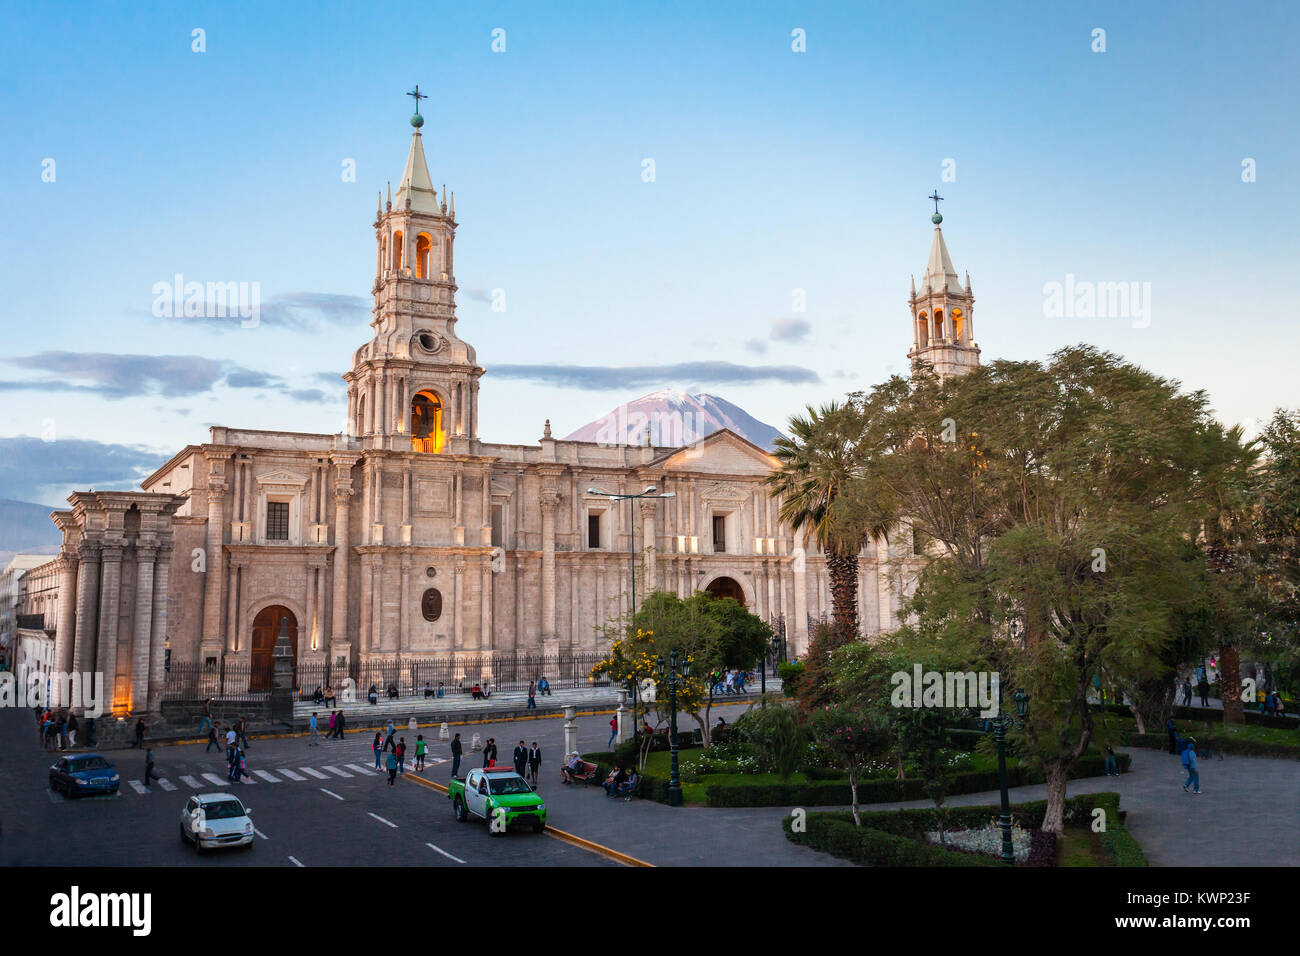 The Basilica Cathedral of Arequipa on sunset, Arequipa in Peru Stock Photo